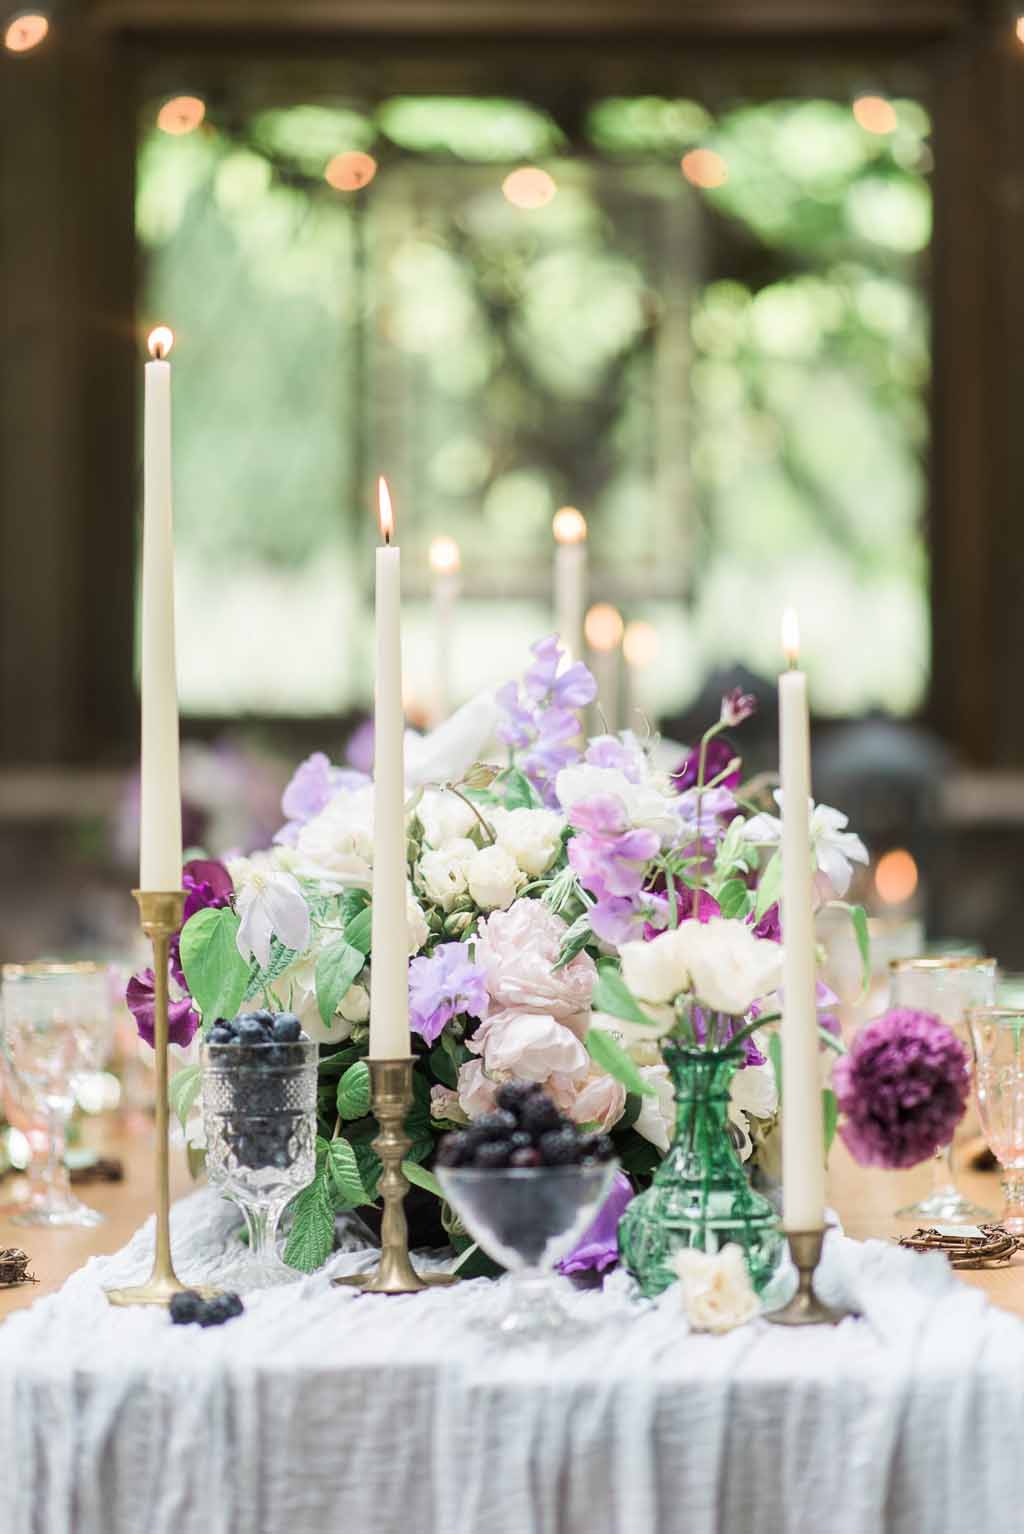 Bella Fiori Florist - Bella Luna Farms - Becca Jones Photography - Snohomish Washington - table decor designed by Alicia of Bella Fiori. Floral centerpiece created with garden roses, sweet peas, anemones, clematis in purple, lavender, and white. Blueberries and blackberries added a touch of blue to the centerpiece.